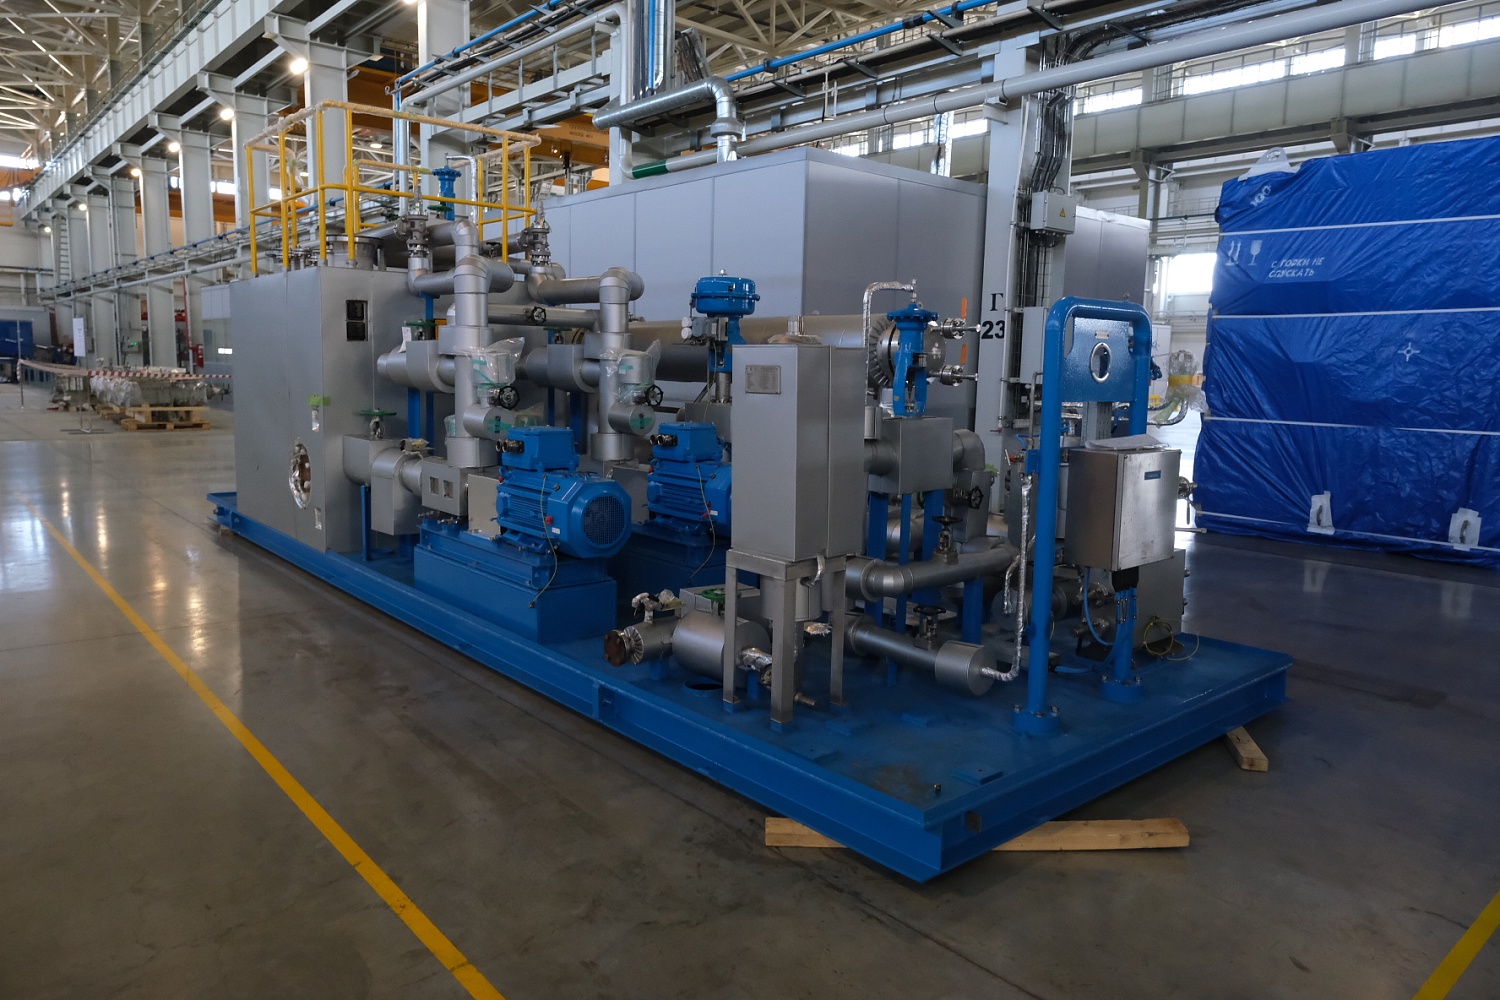 Manufacturing of Two Compressor Units for KNGK-INPZ LLC сontinues with the Subsequent Delivery to Ilsky Oil Refinery